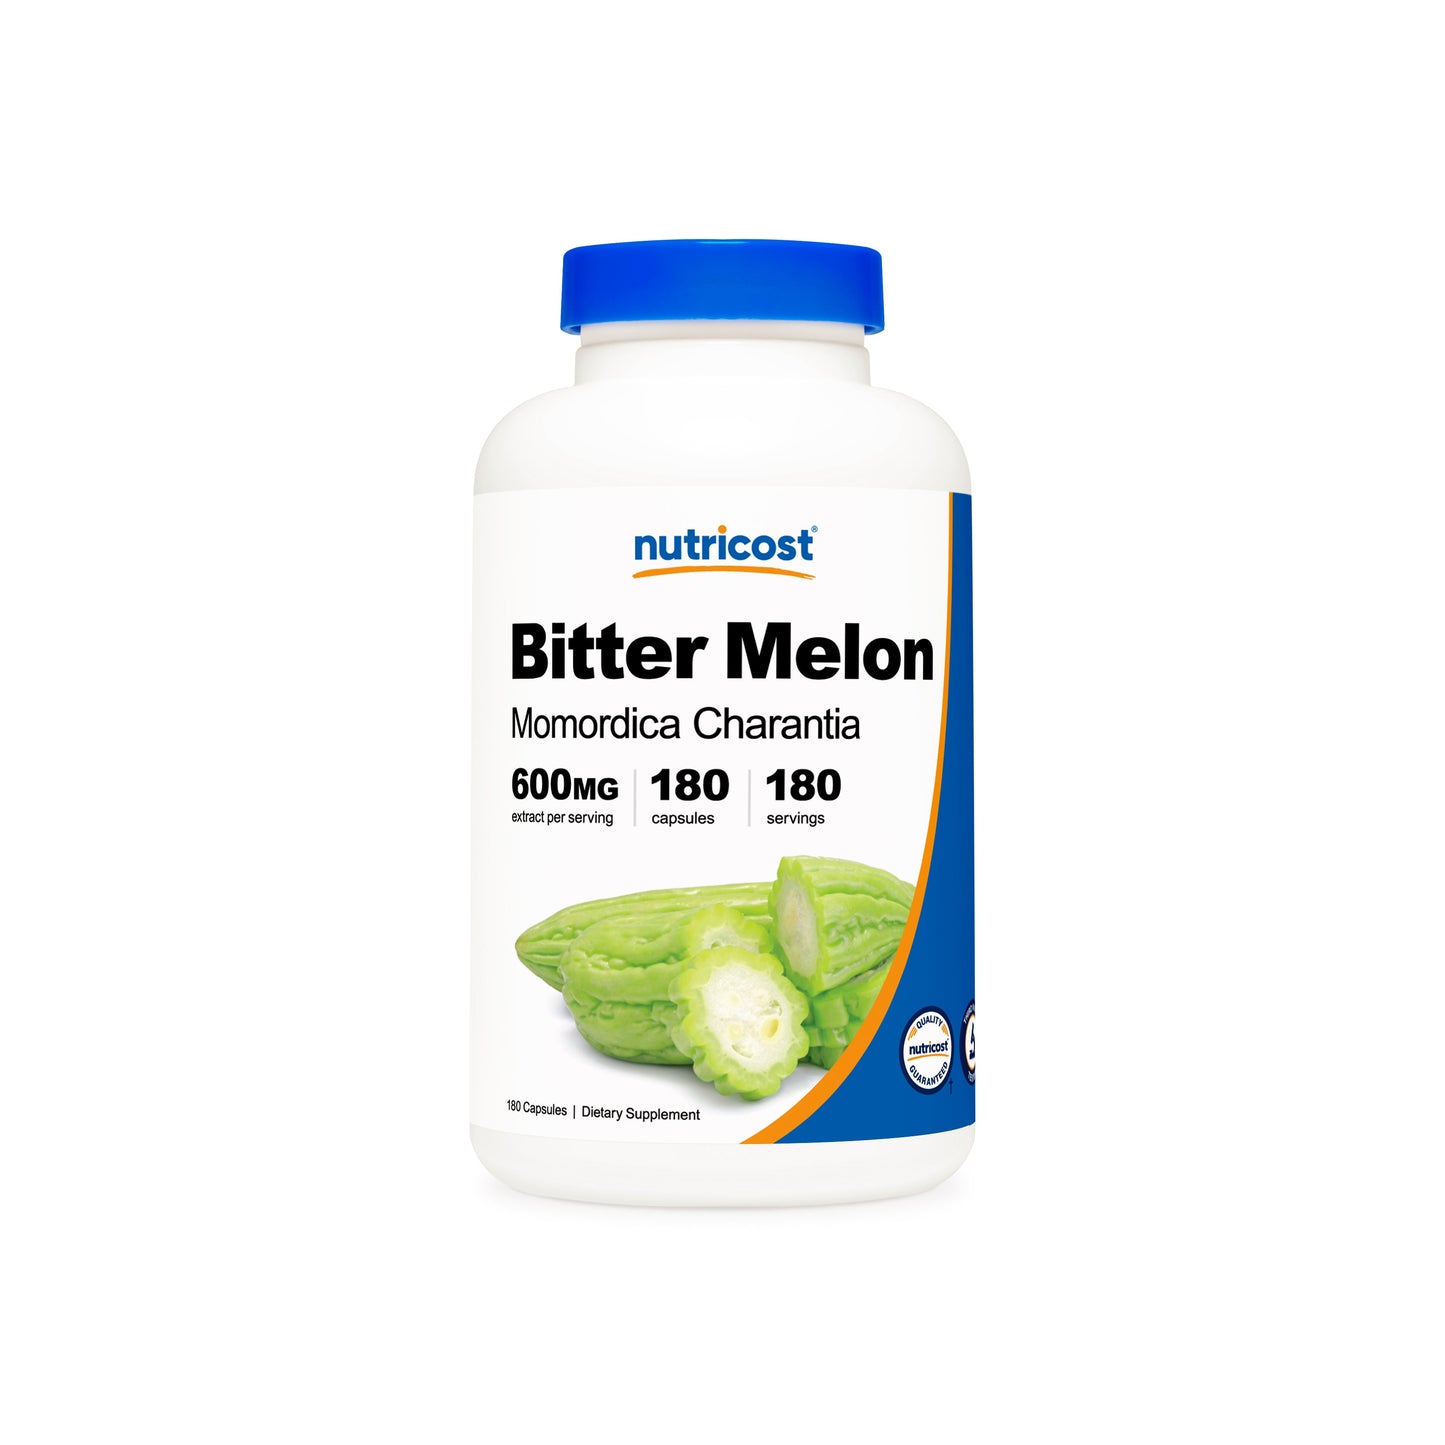 Nutricost Bitter Melon Capsules